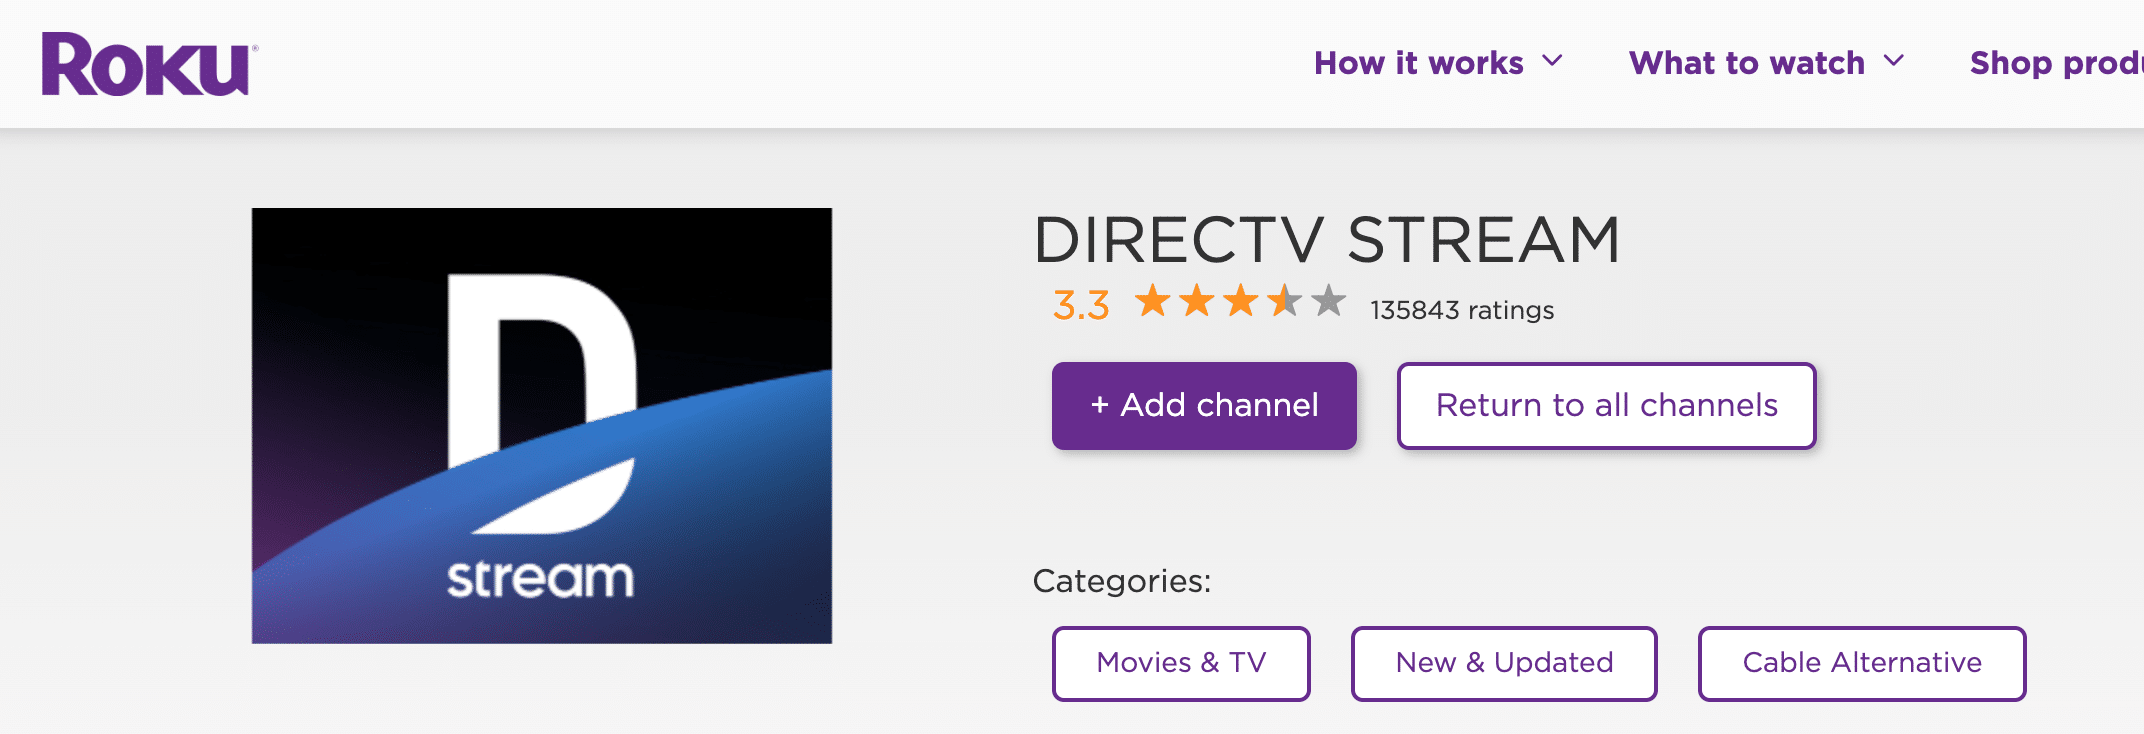 how to watch cowboys game tonight on roku